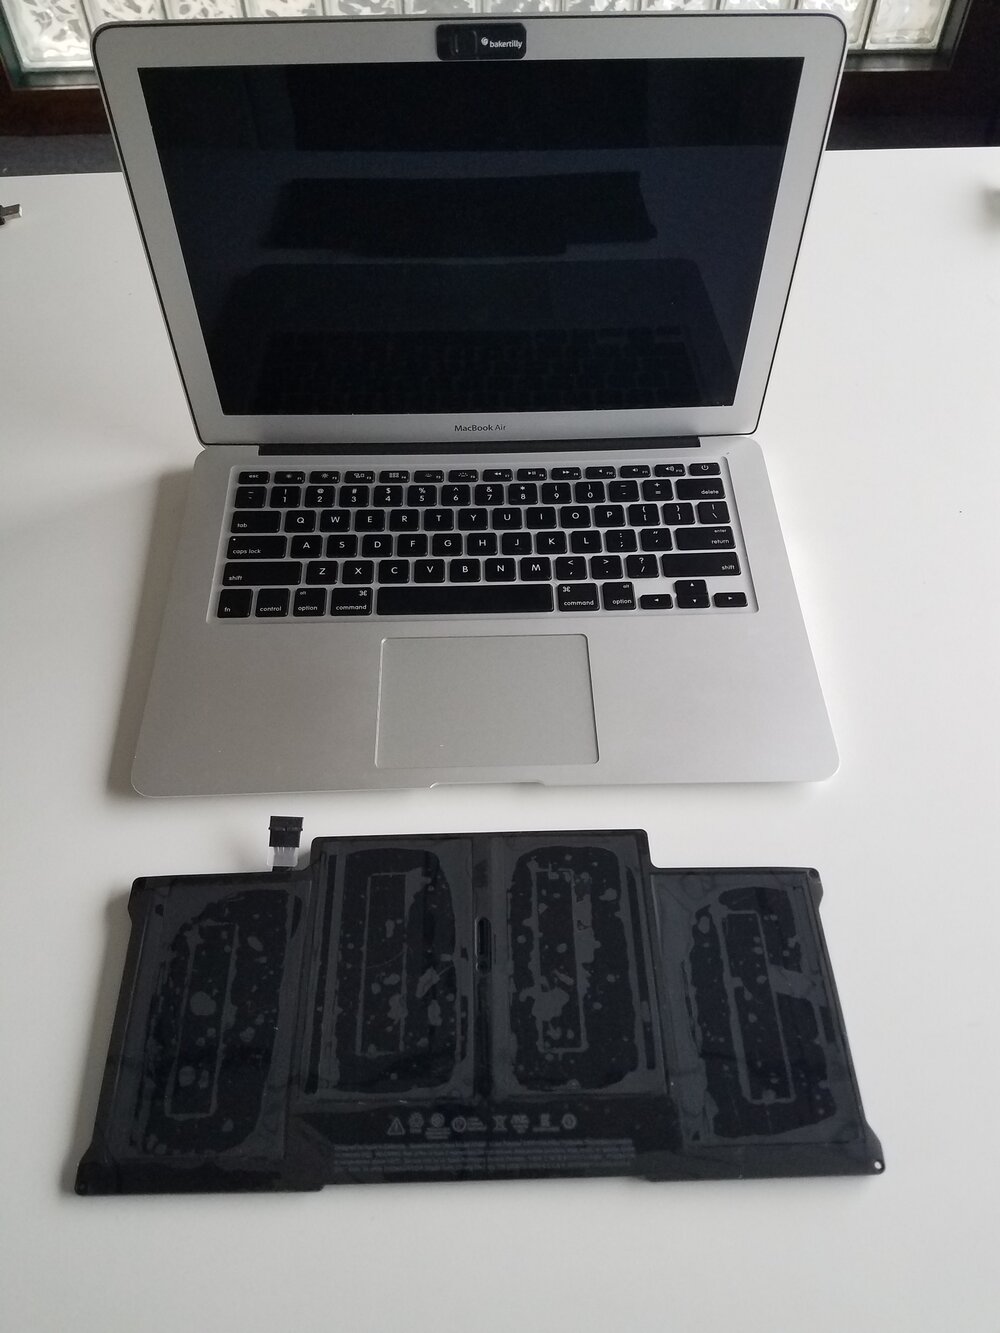 Battery for Macbook Air (Early 2015) — Epoch IT: Computer Repair Allentown, IT Services, Allentown PA, Lehigh Valley, Bethlehem, Easton